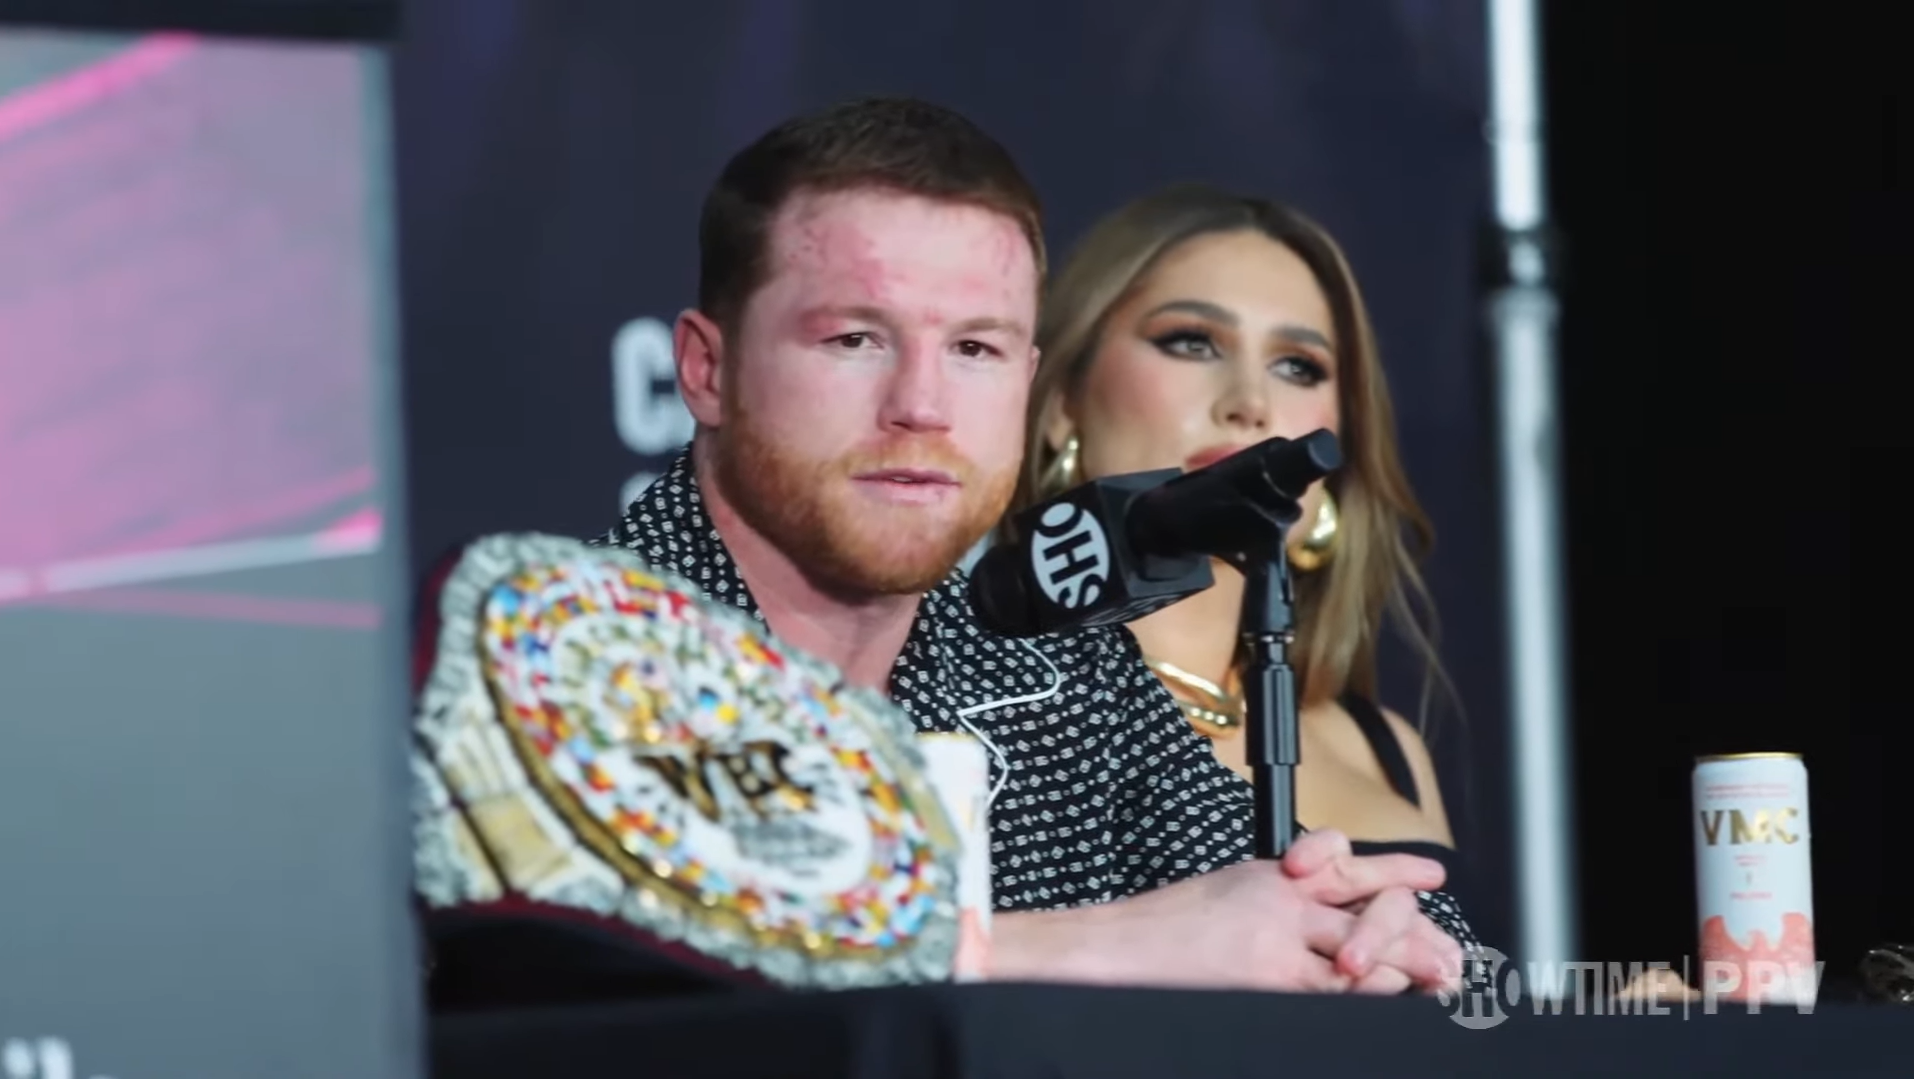 Canelo Alvarez said he feels in his prime again after beating Jermell Charlo